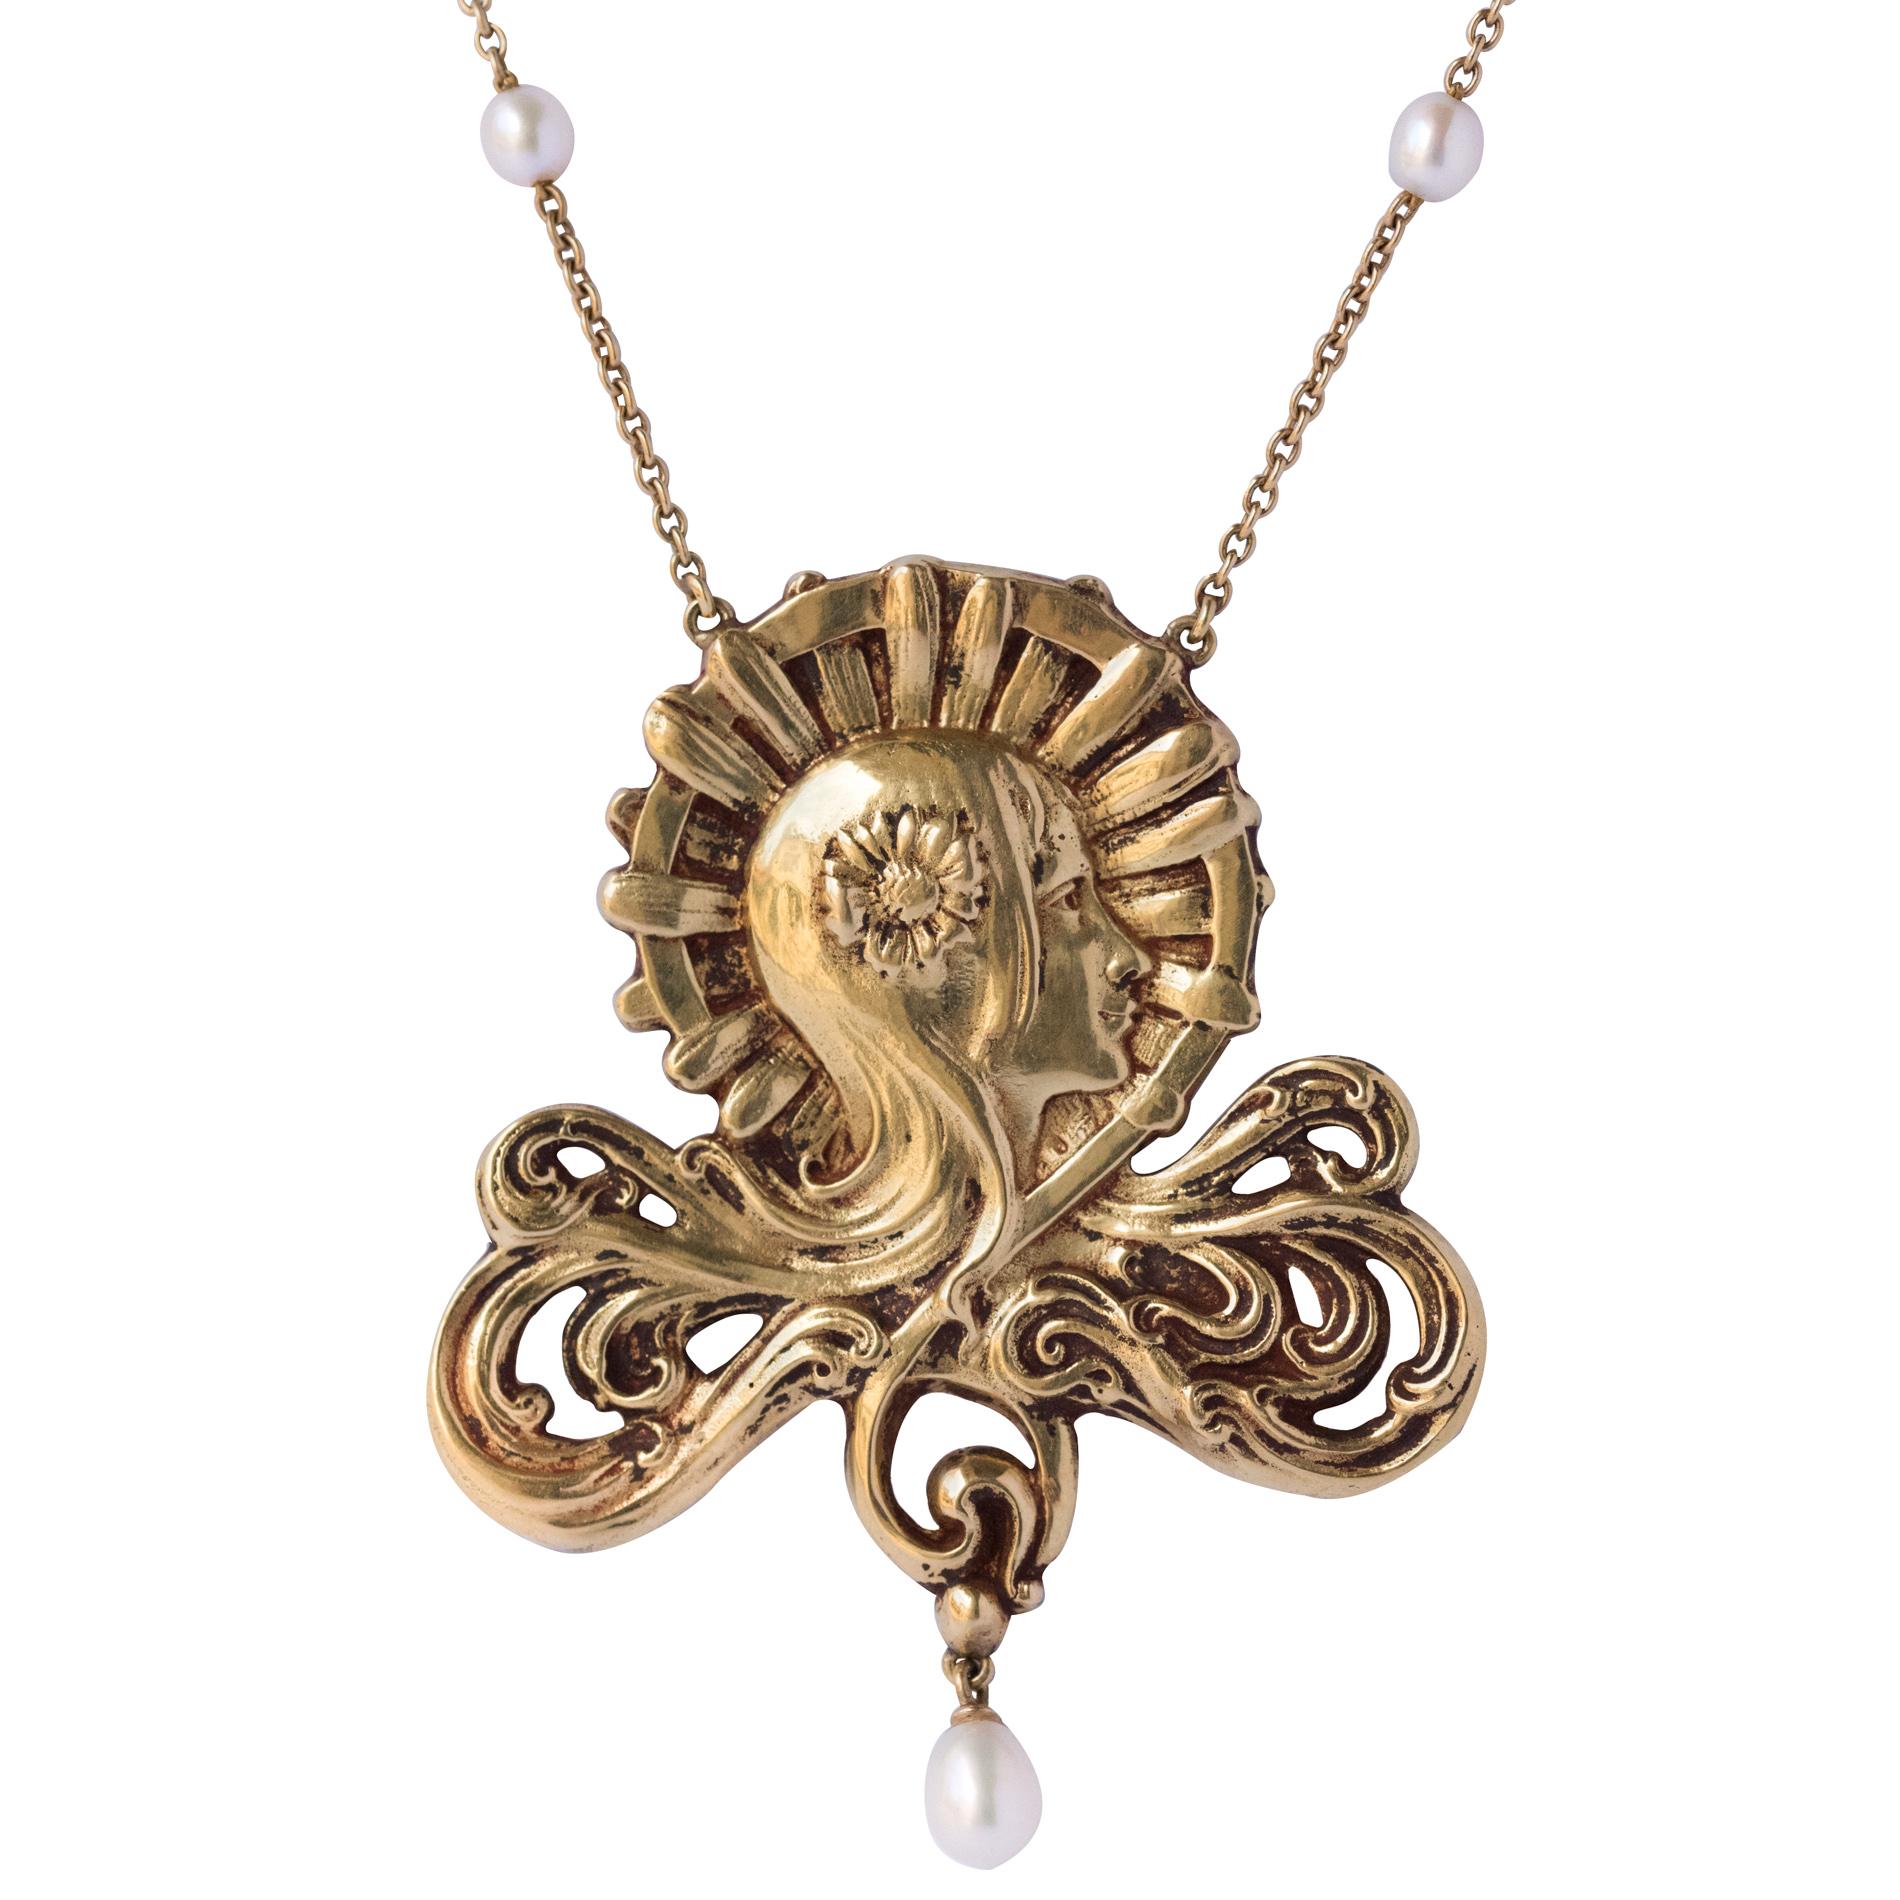 French Art Nouveau Pearl Gold Necklace Featuring a Woman’s Head